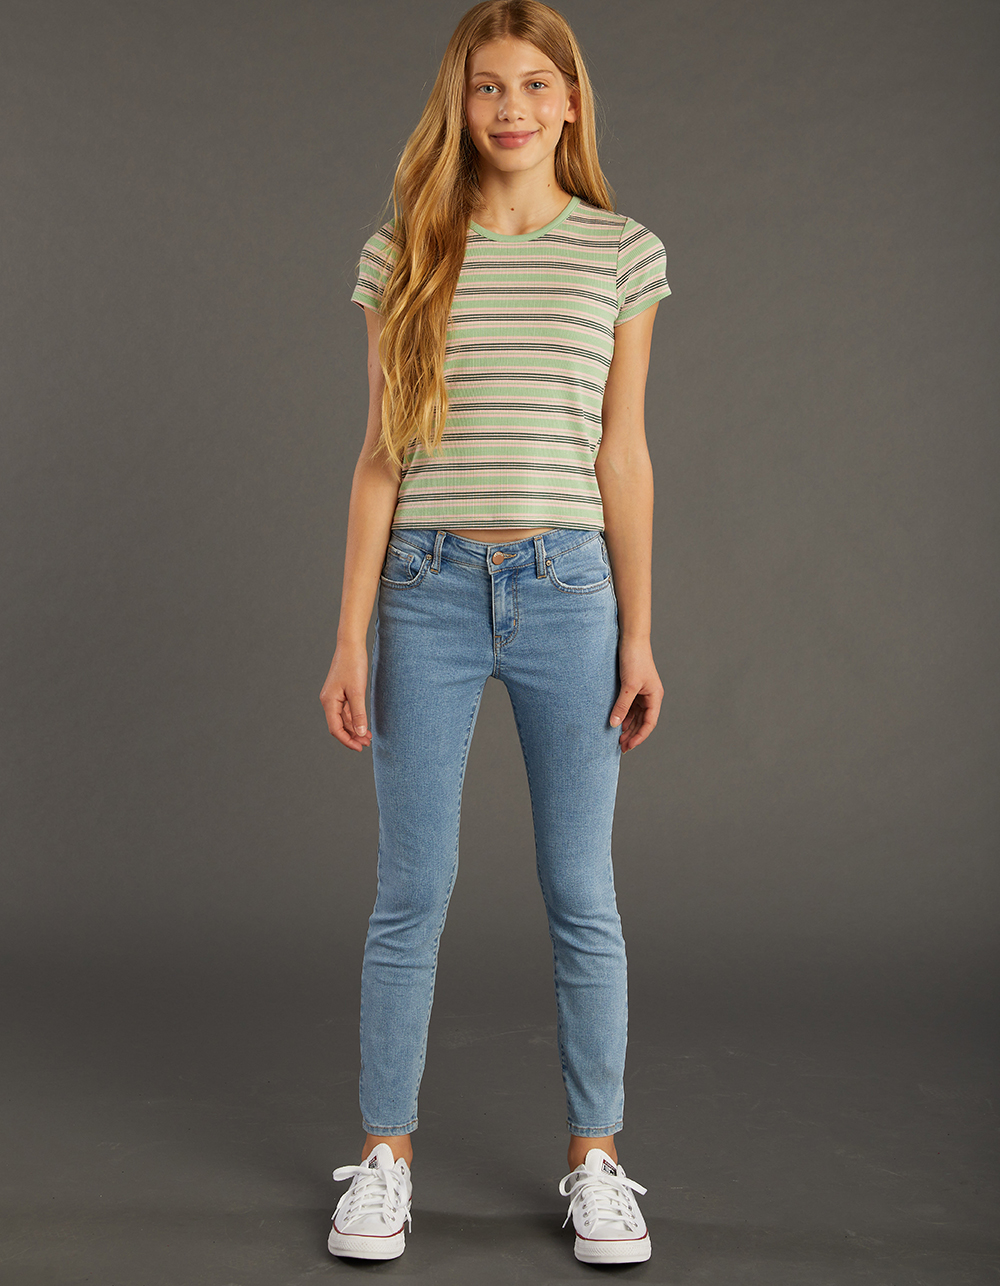 decorate transfusion Adelaide RSQ Girls Mid Rise Ankle Jeans - LIGHT WASH | Tillys